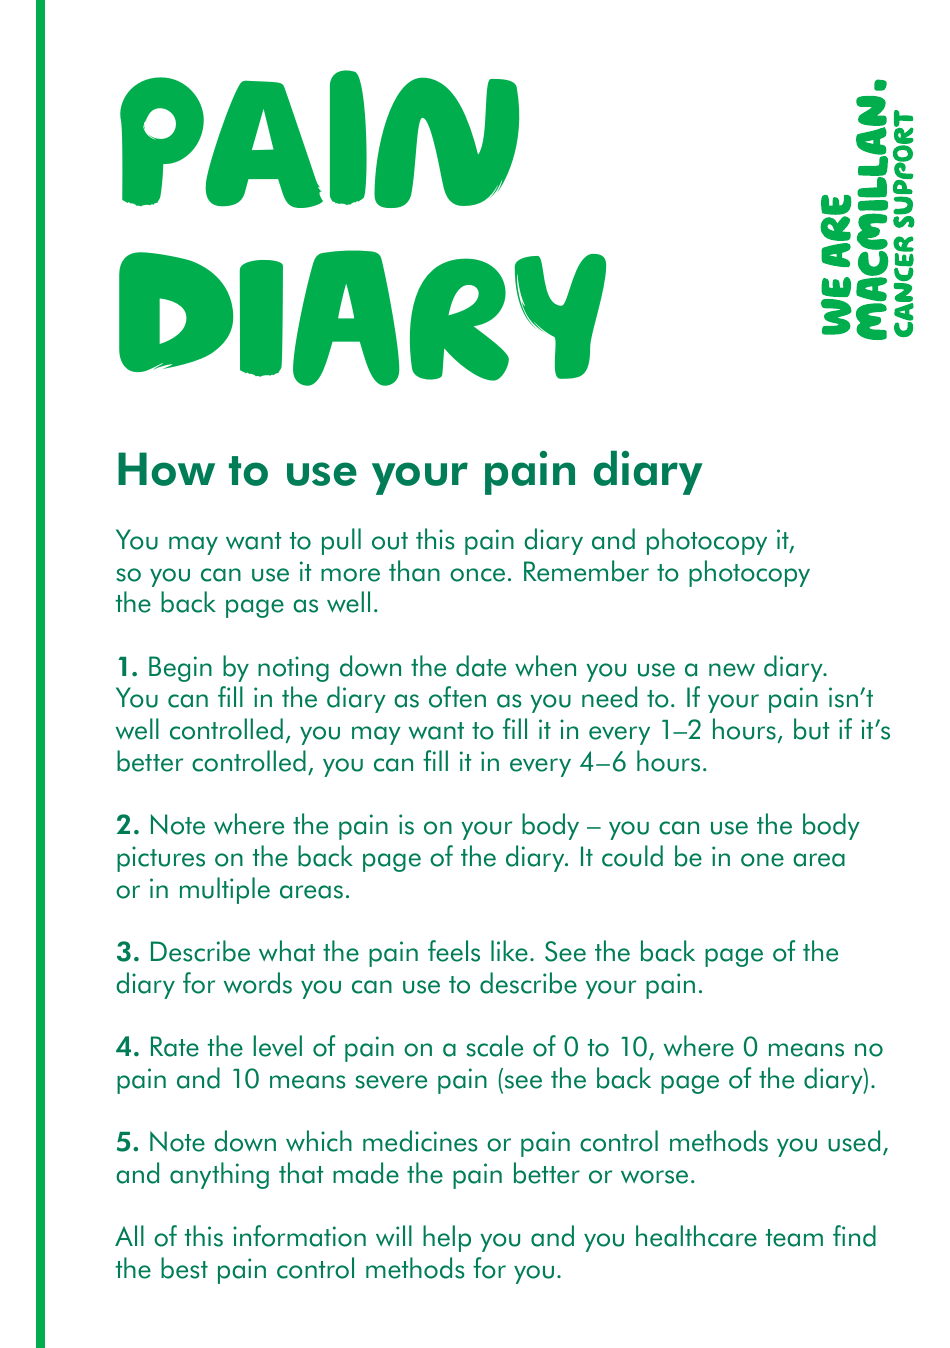 pain-diary-template-we-are-macmillan-cancer-support-download